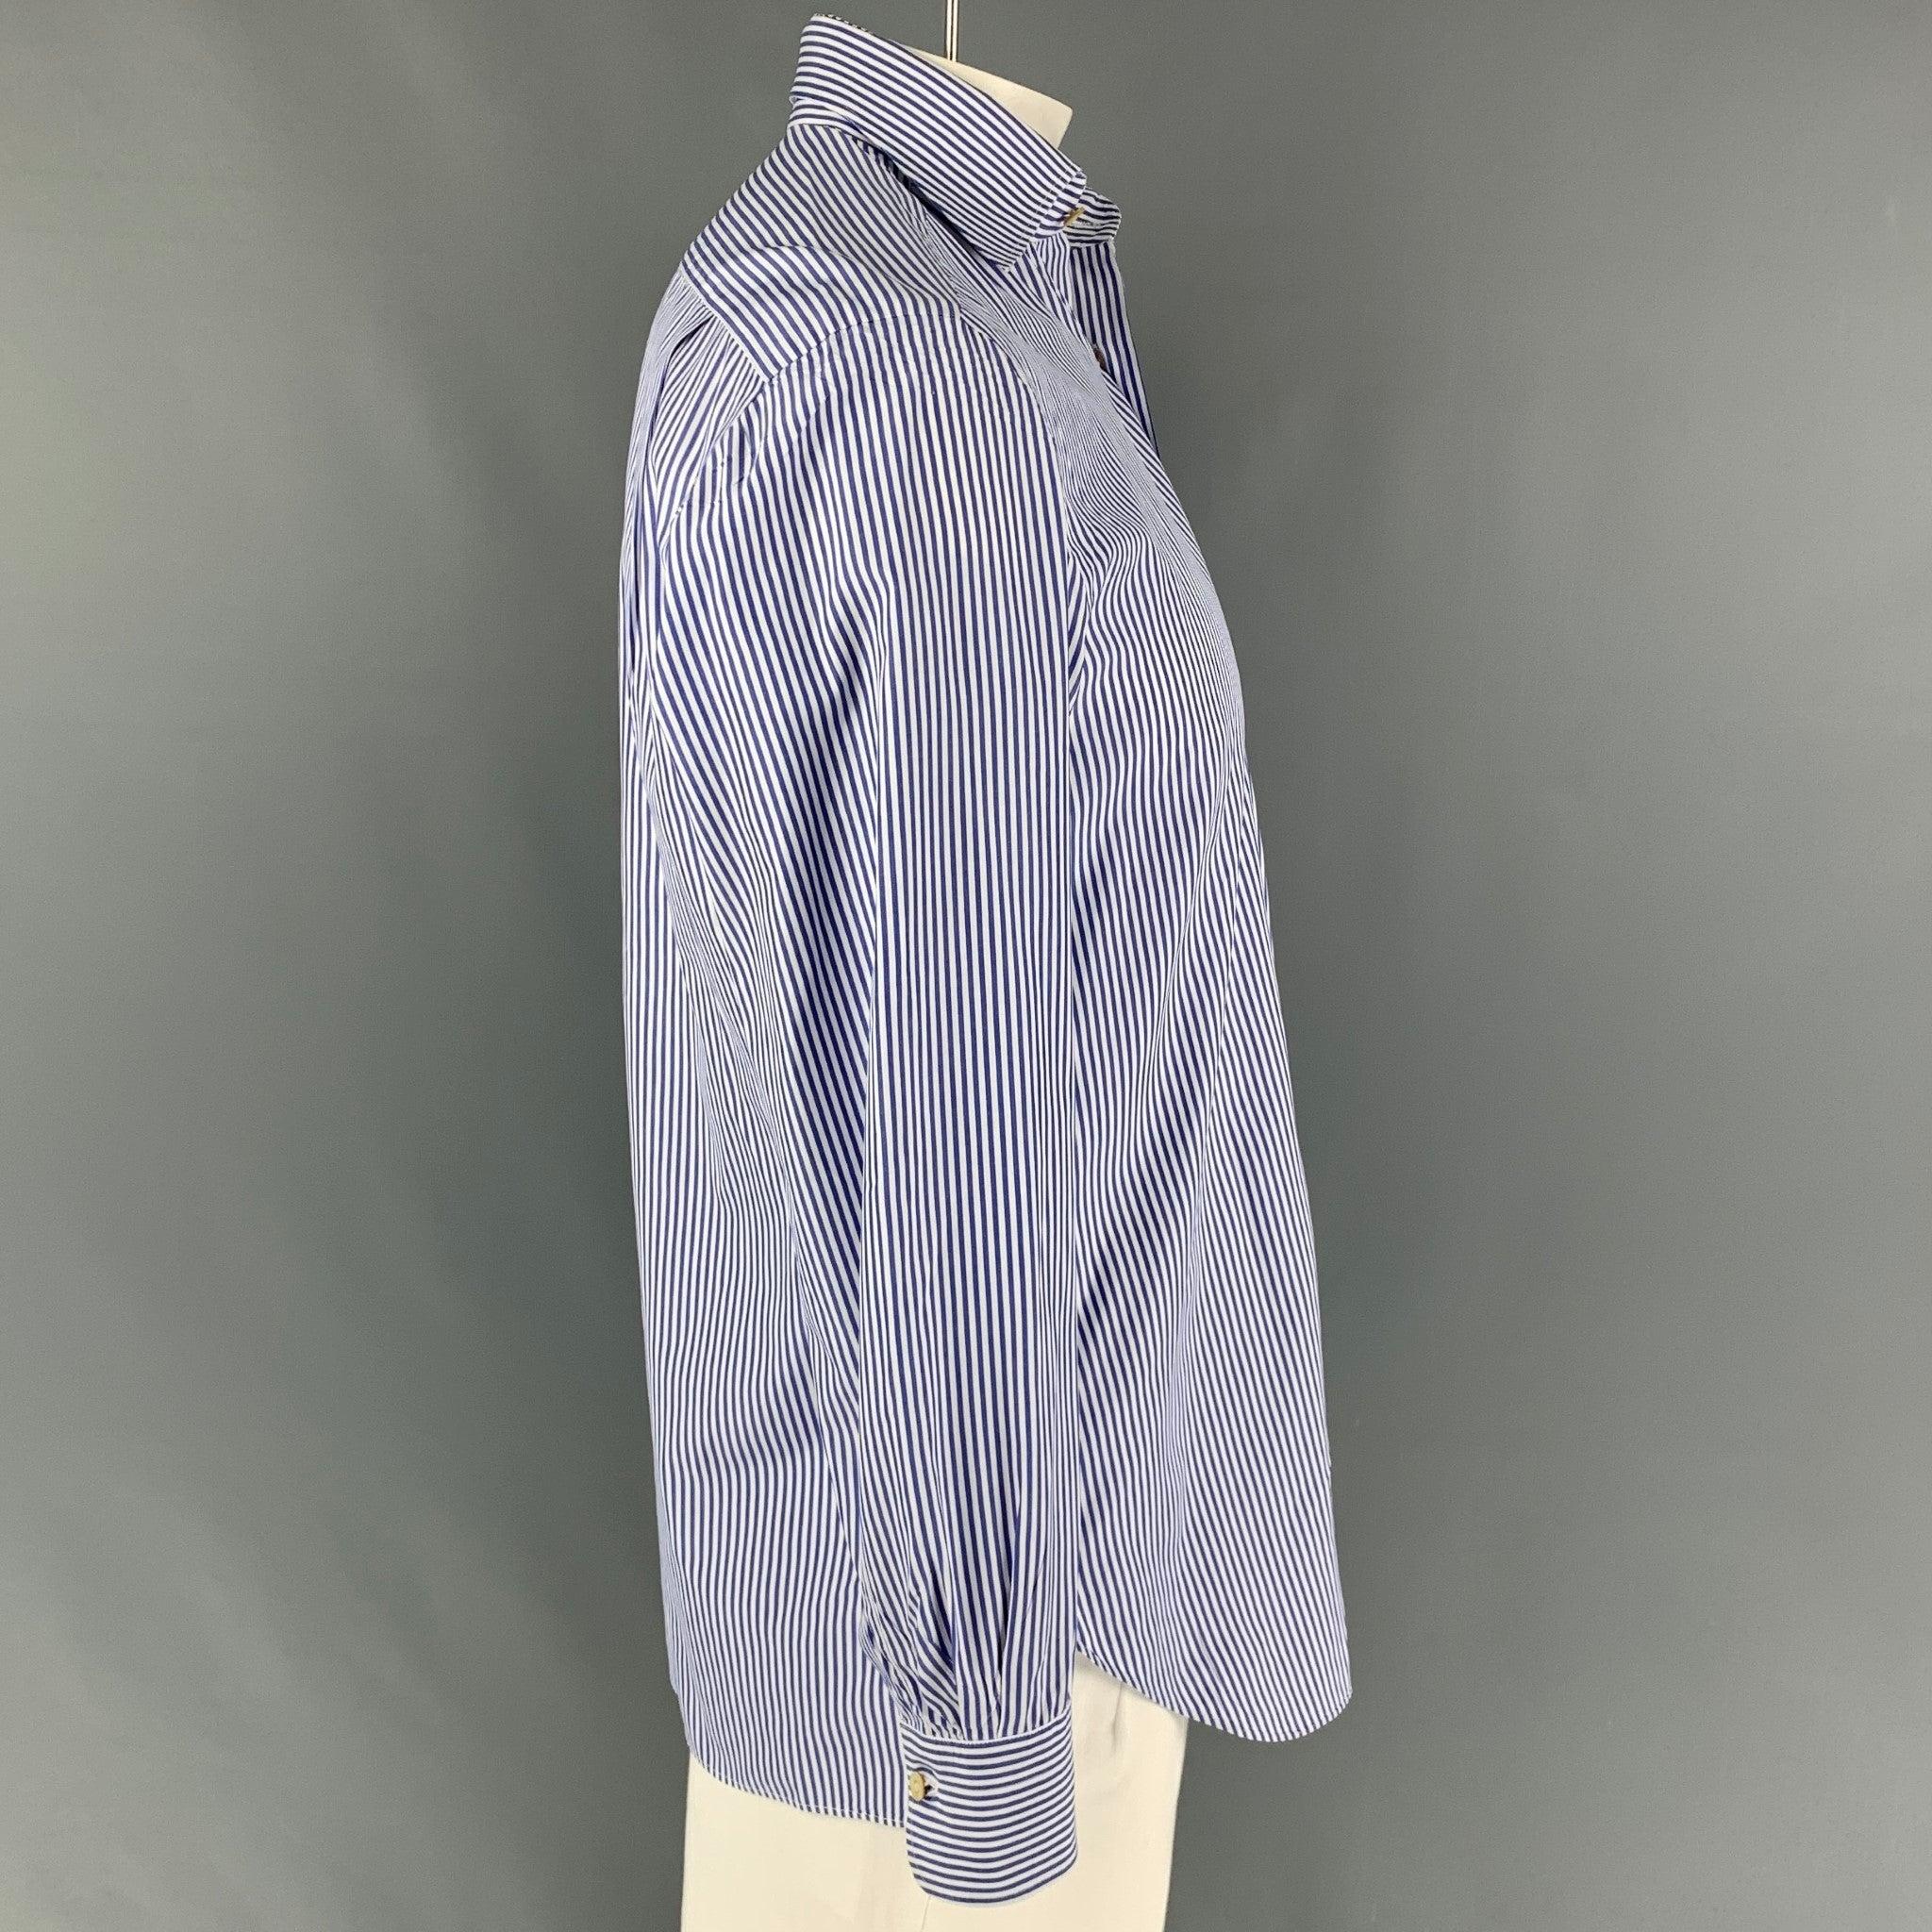 KITON long sleeve shirt comes in a white & navy stripe cotton featuring a spread collar, patch pocket, and a button up closure. Made in Italy.
Very Good
Pre-Owned Condition.  

Marked:   15.5/39 

Measurements: 
 
Shoulder: 19.5 inches  Chest: 44